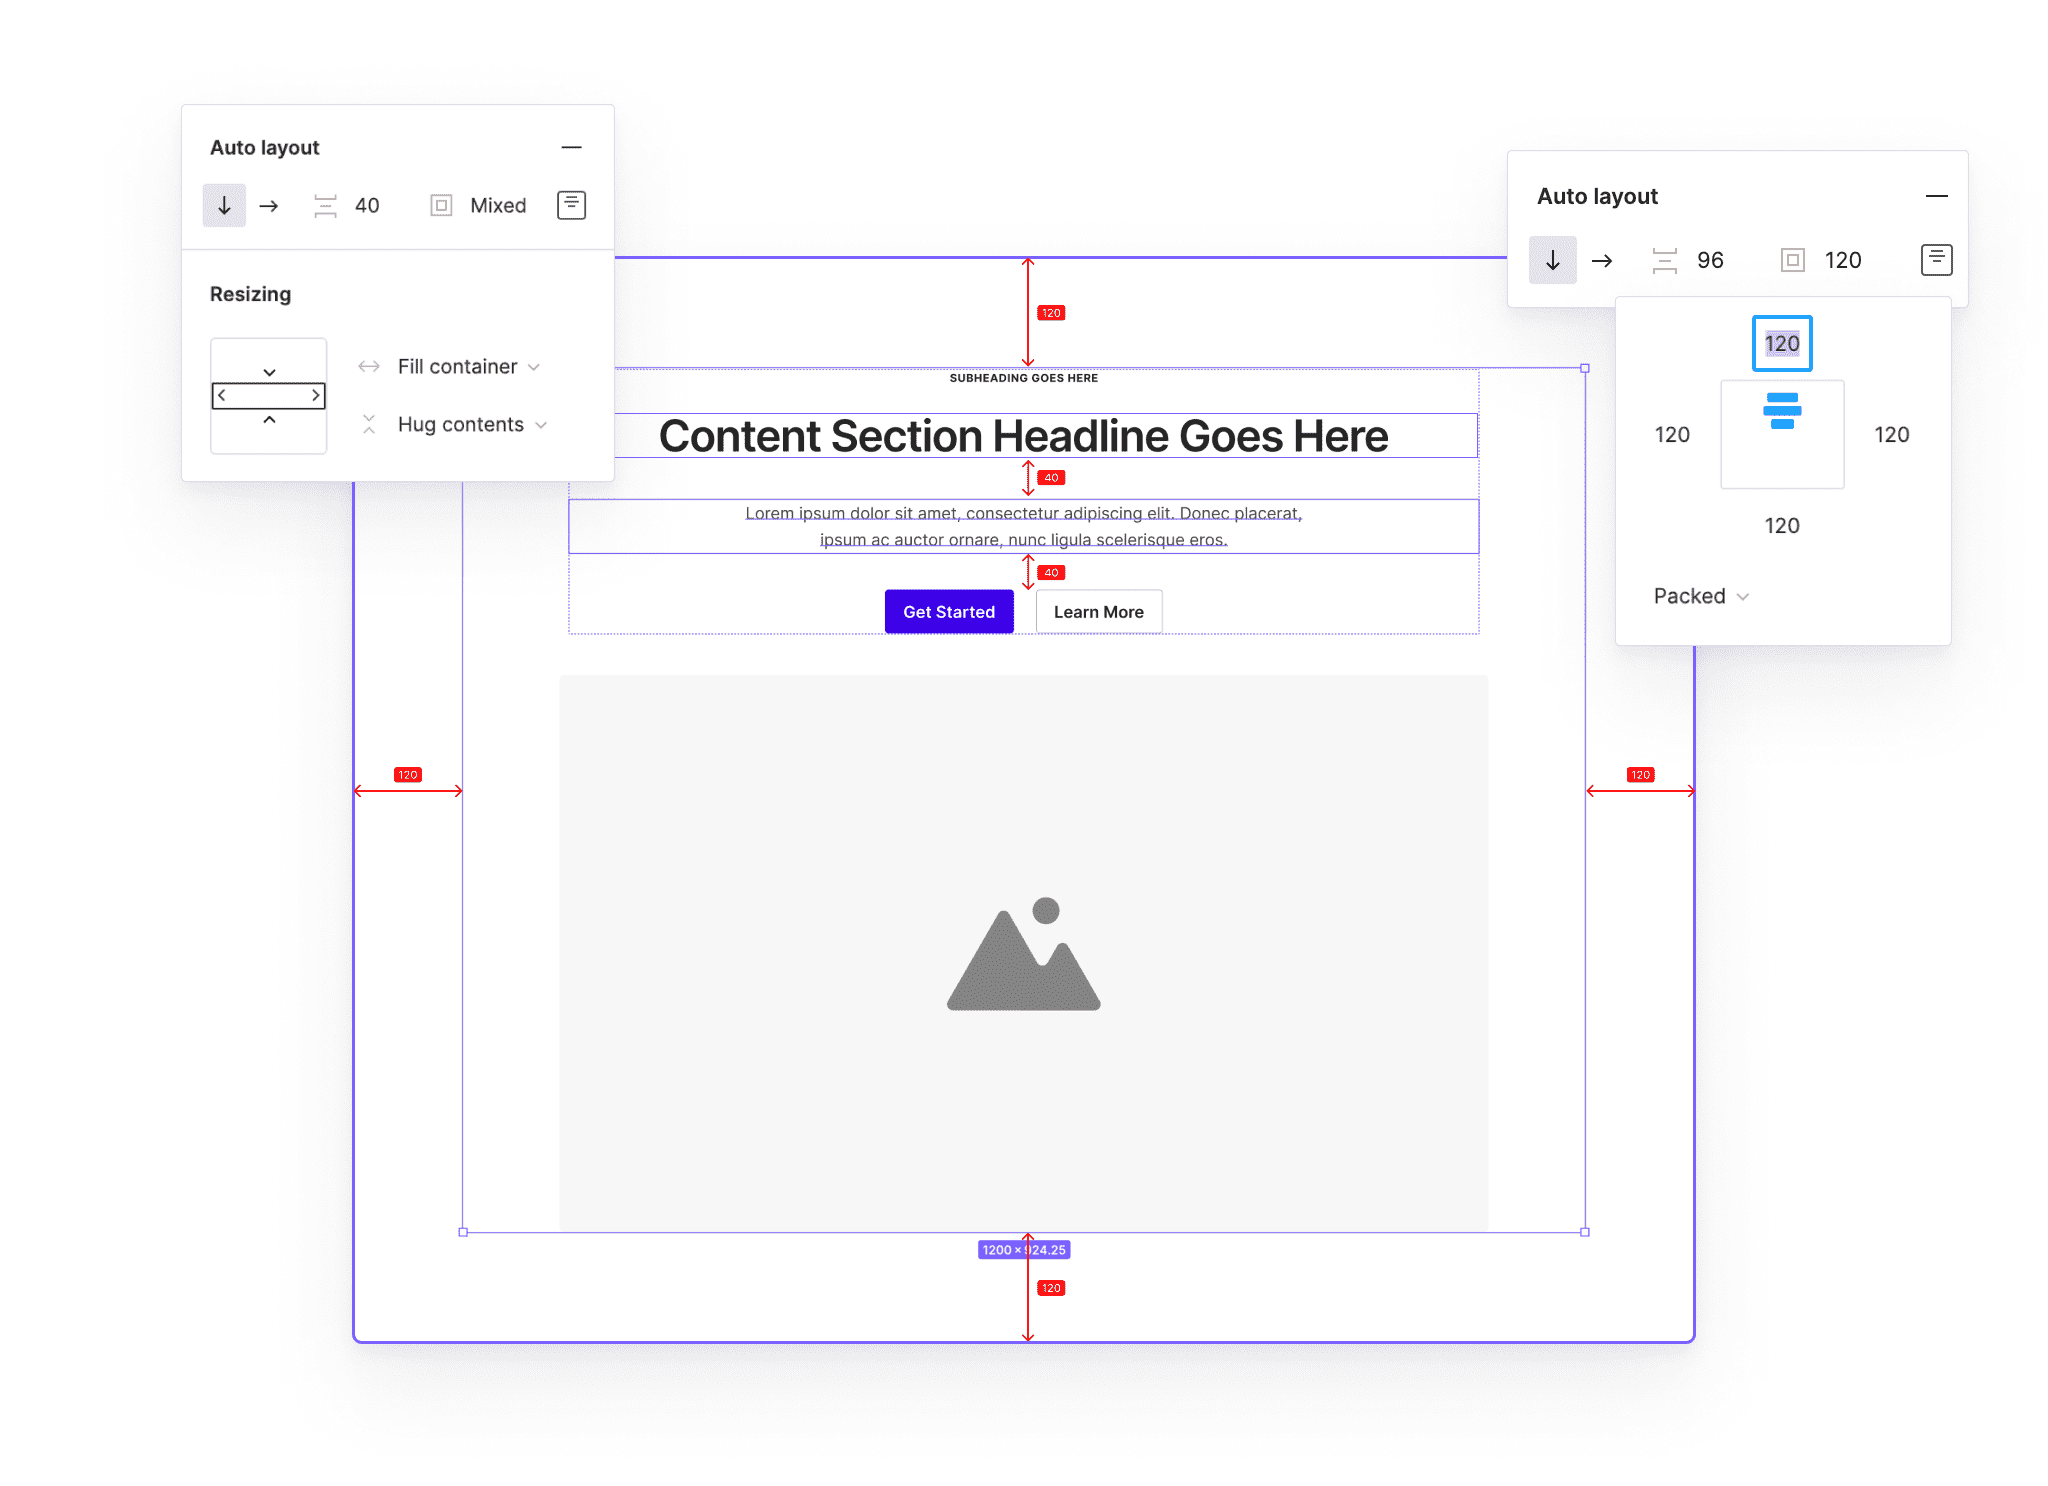 Designed with a full “Auto-Layout” support in Figma.